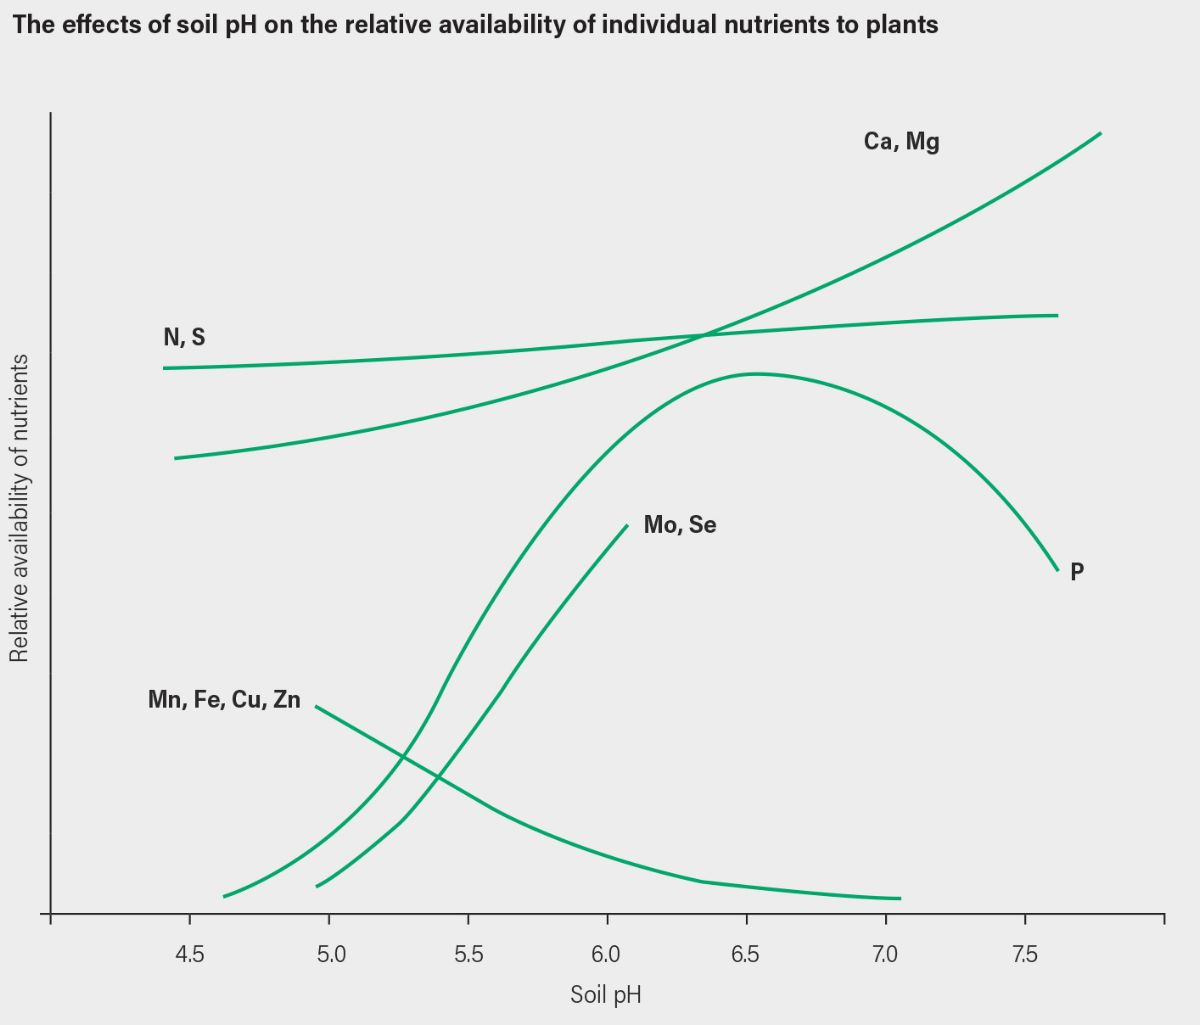 Graph showing the effects of soil pH on the relative availability of individual nutrients to plants